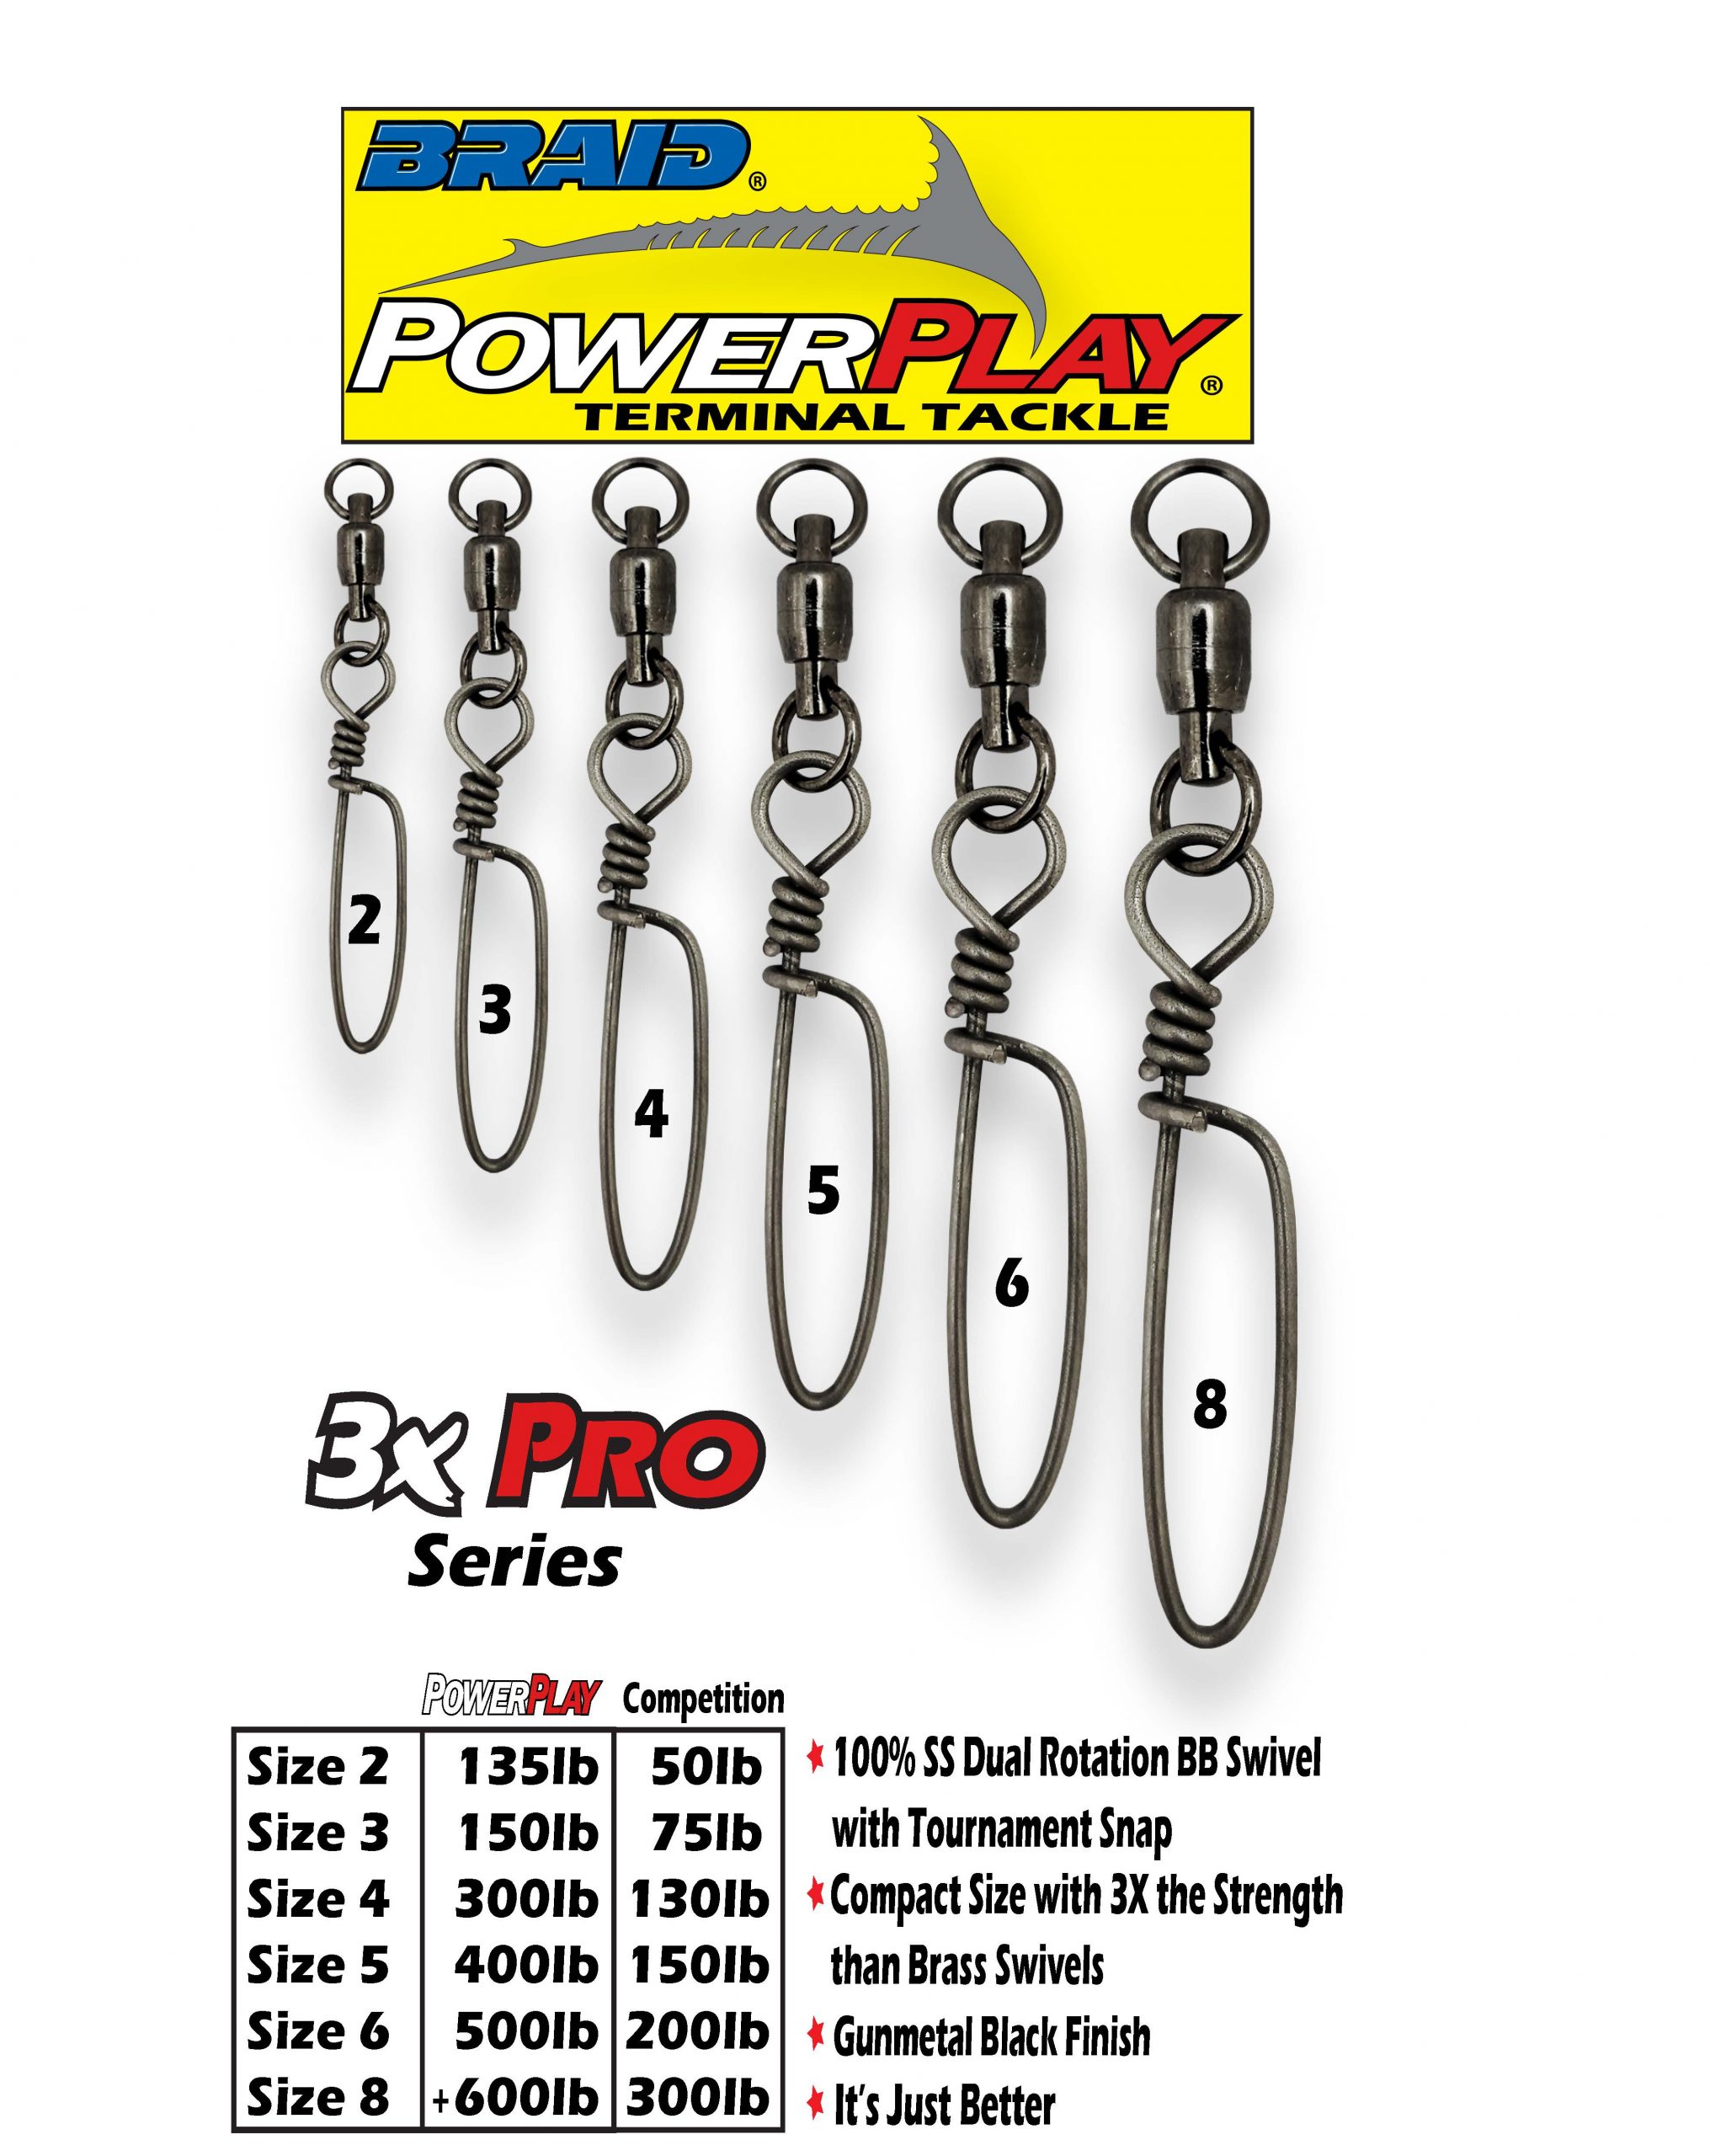 6 Tournament Snap Swivels. Pack of 10. Suits 10-24kg tackle